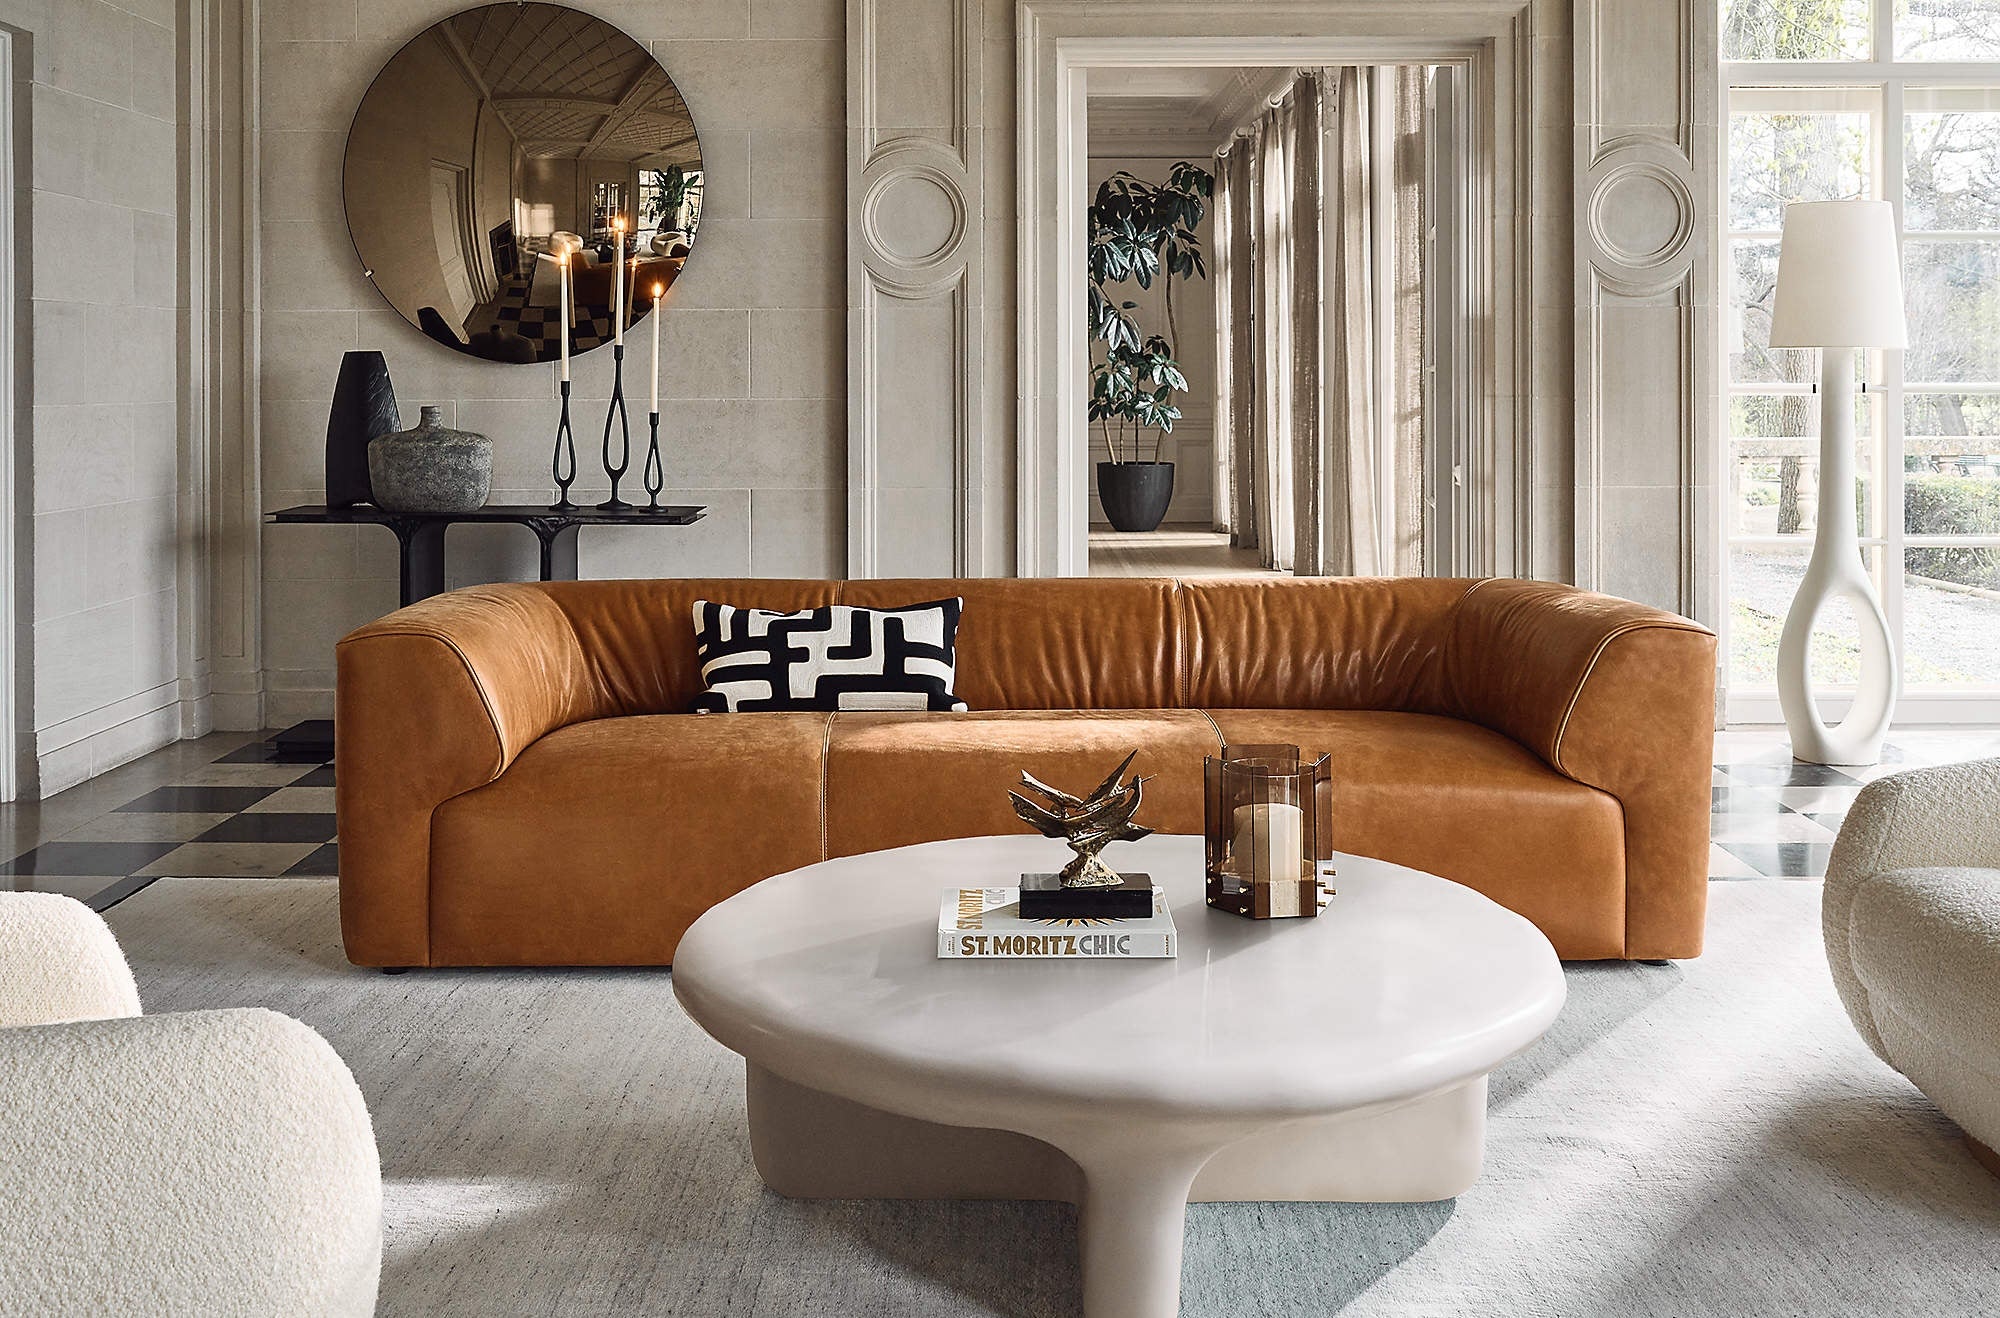 A stylish living room features a caramel-colored leather sofa adorned with a black and white geometric pillow. In front of the sofa is a round, white, modern coffee table. A large, round mirror and decorative items are on the back wall. Natural light streams in from a window.